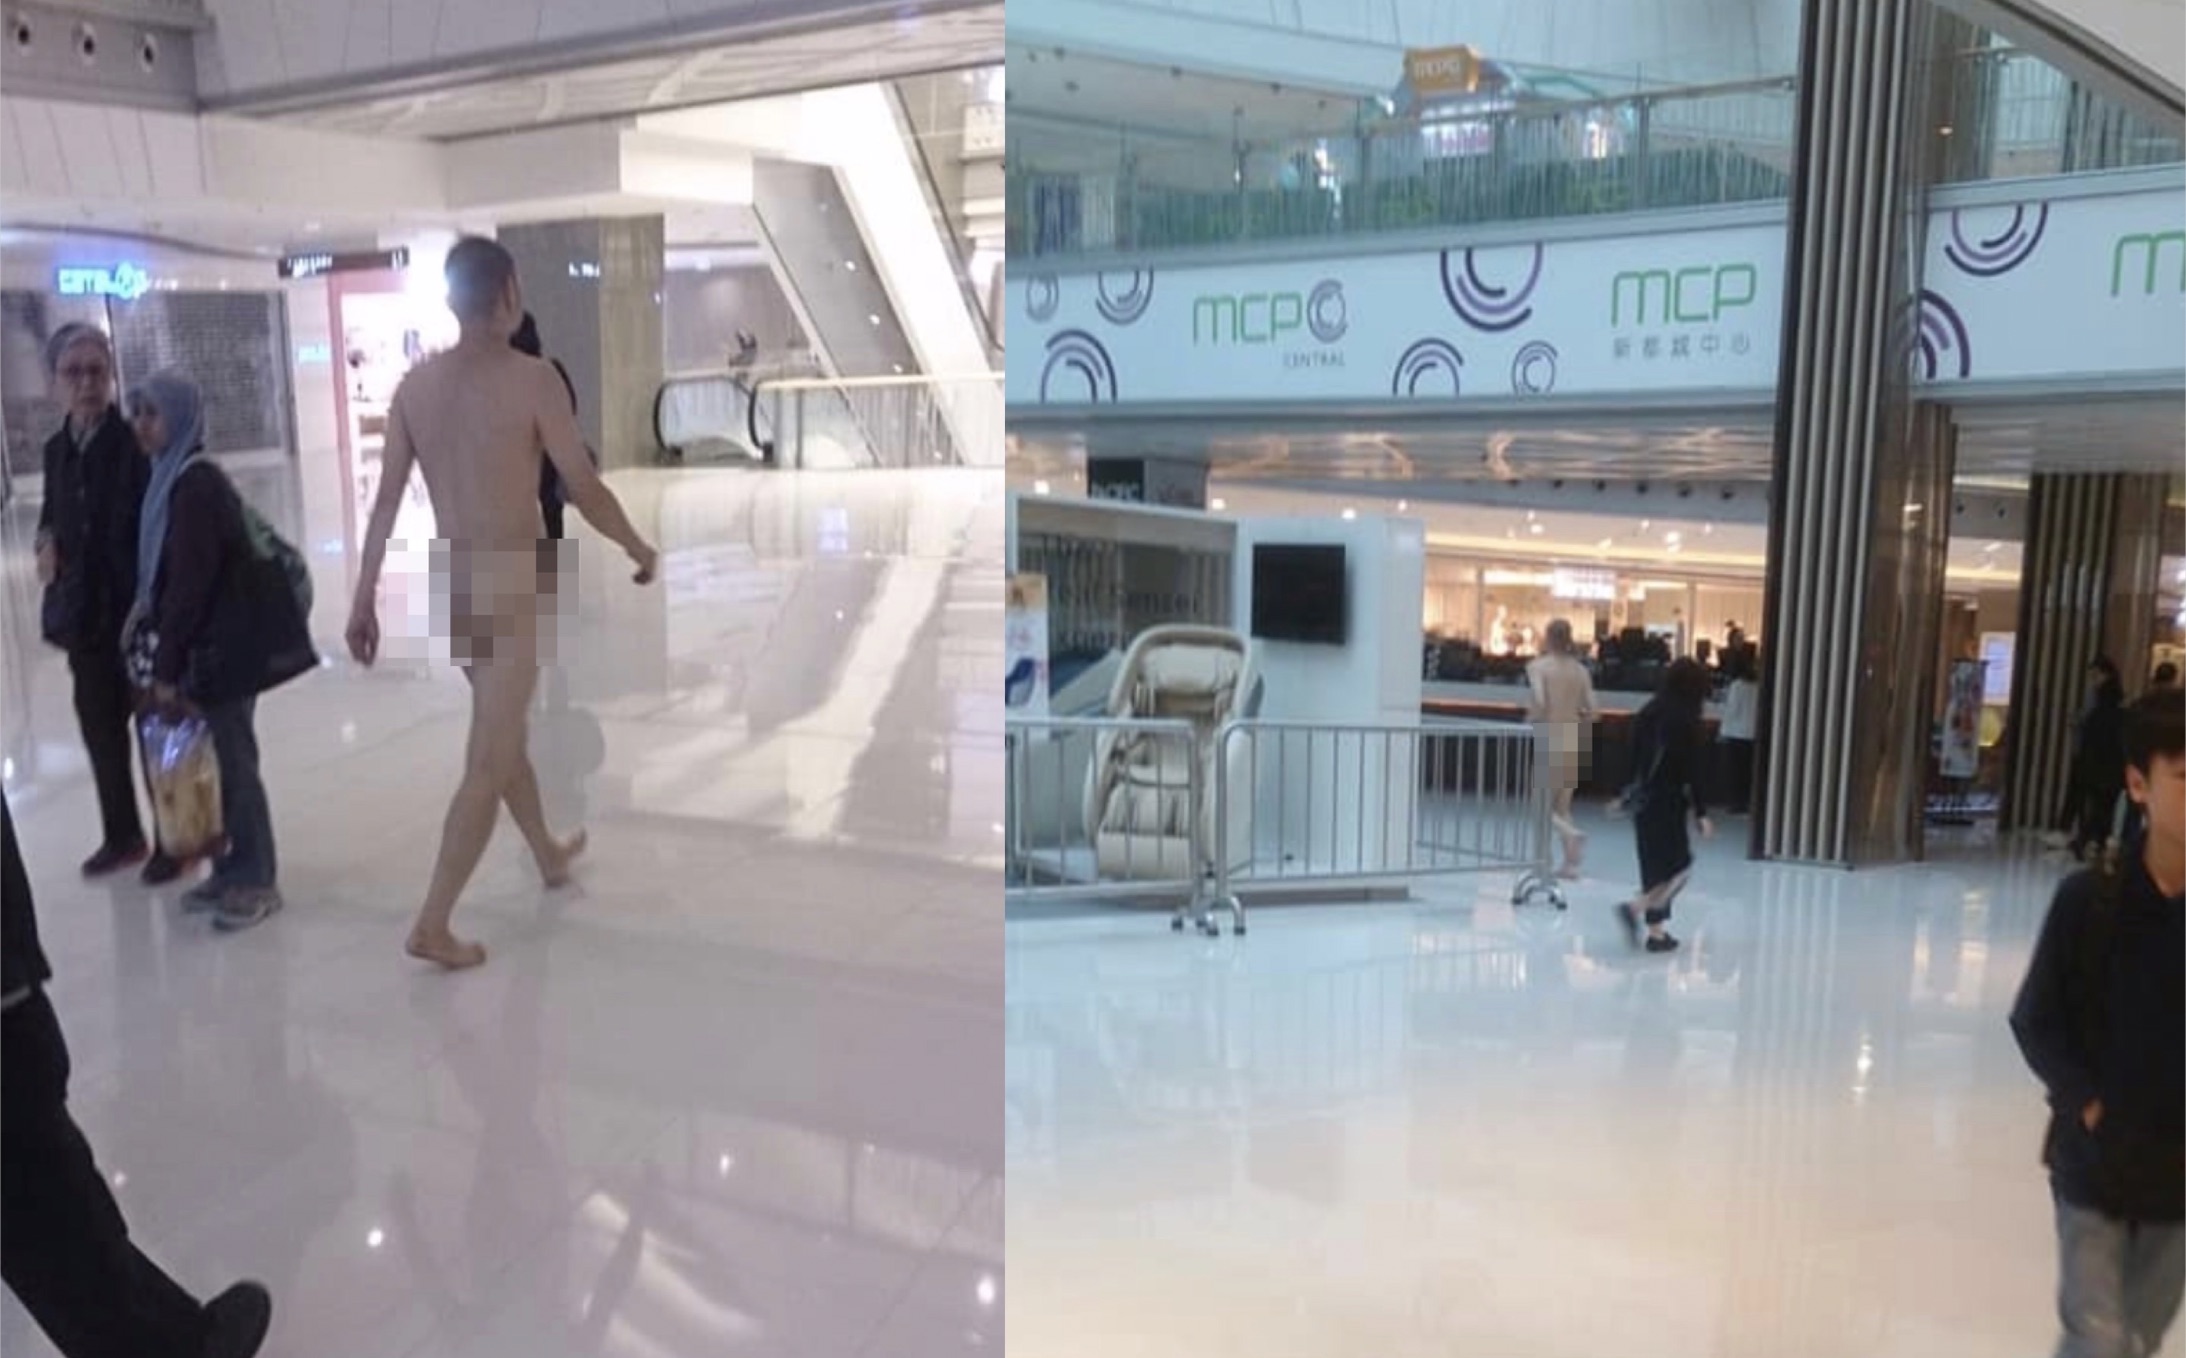 A naked man strolls through a mall in Tseung Kwan O on Sunday. Photo via HK Incident.